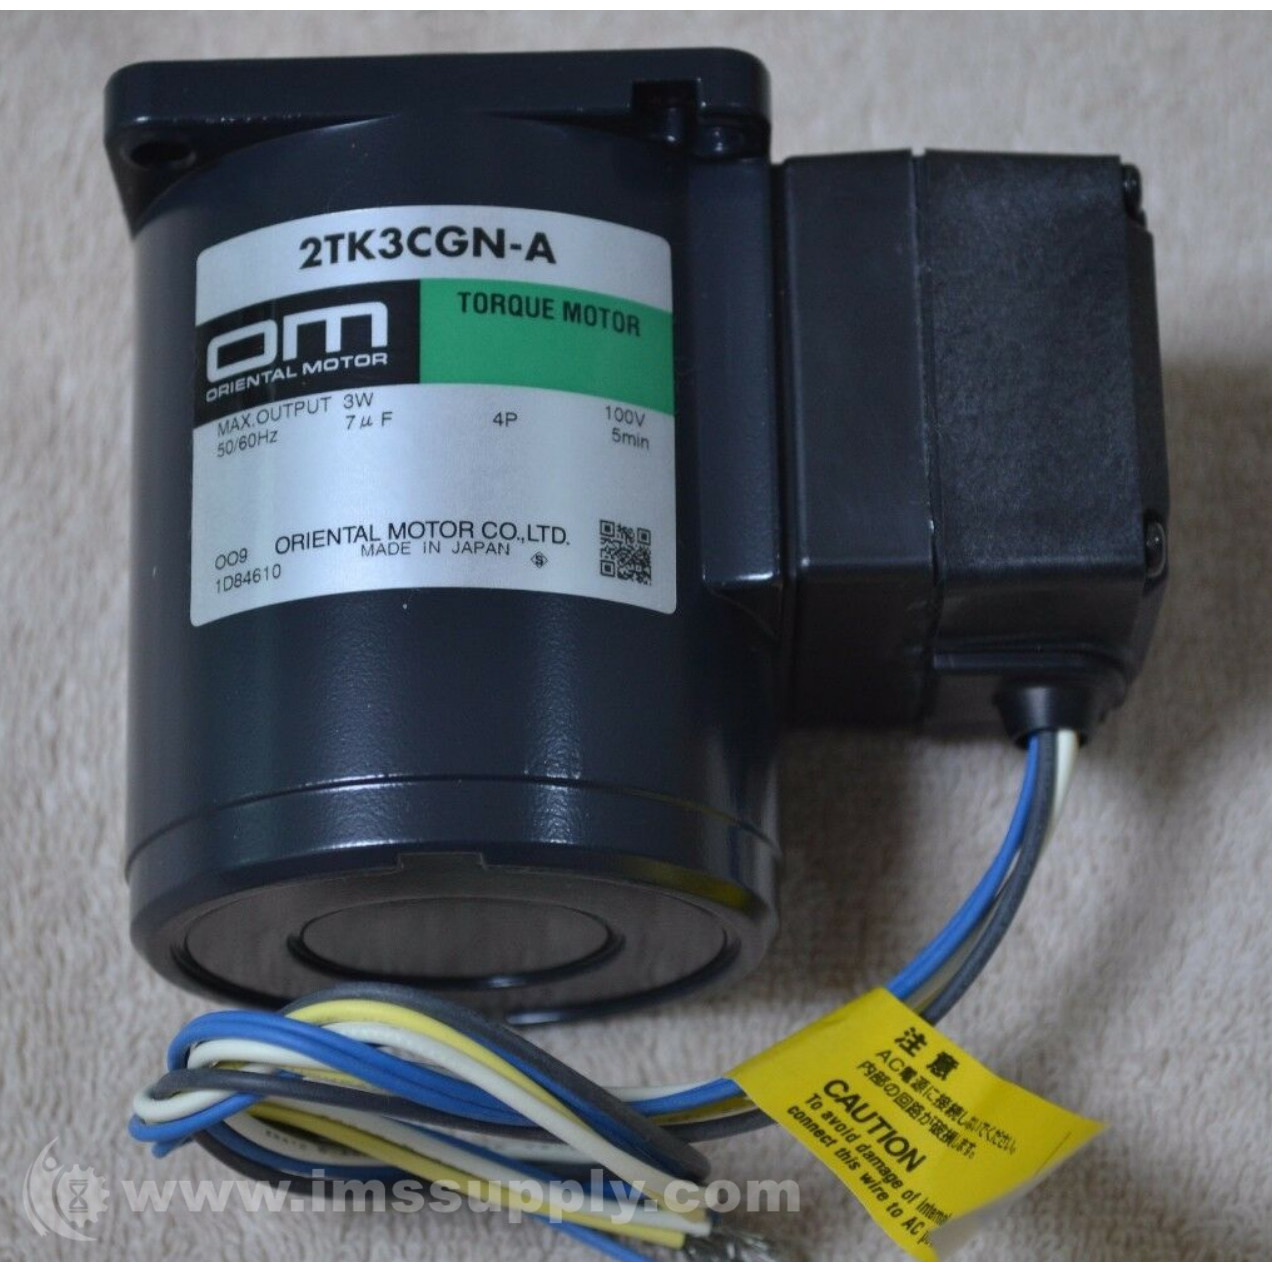 NEW ORIENTAL MOTOR 2TK3GN-A  MOTOR FEDEX OR TRACKED SHIPPING